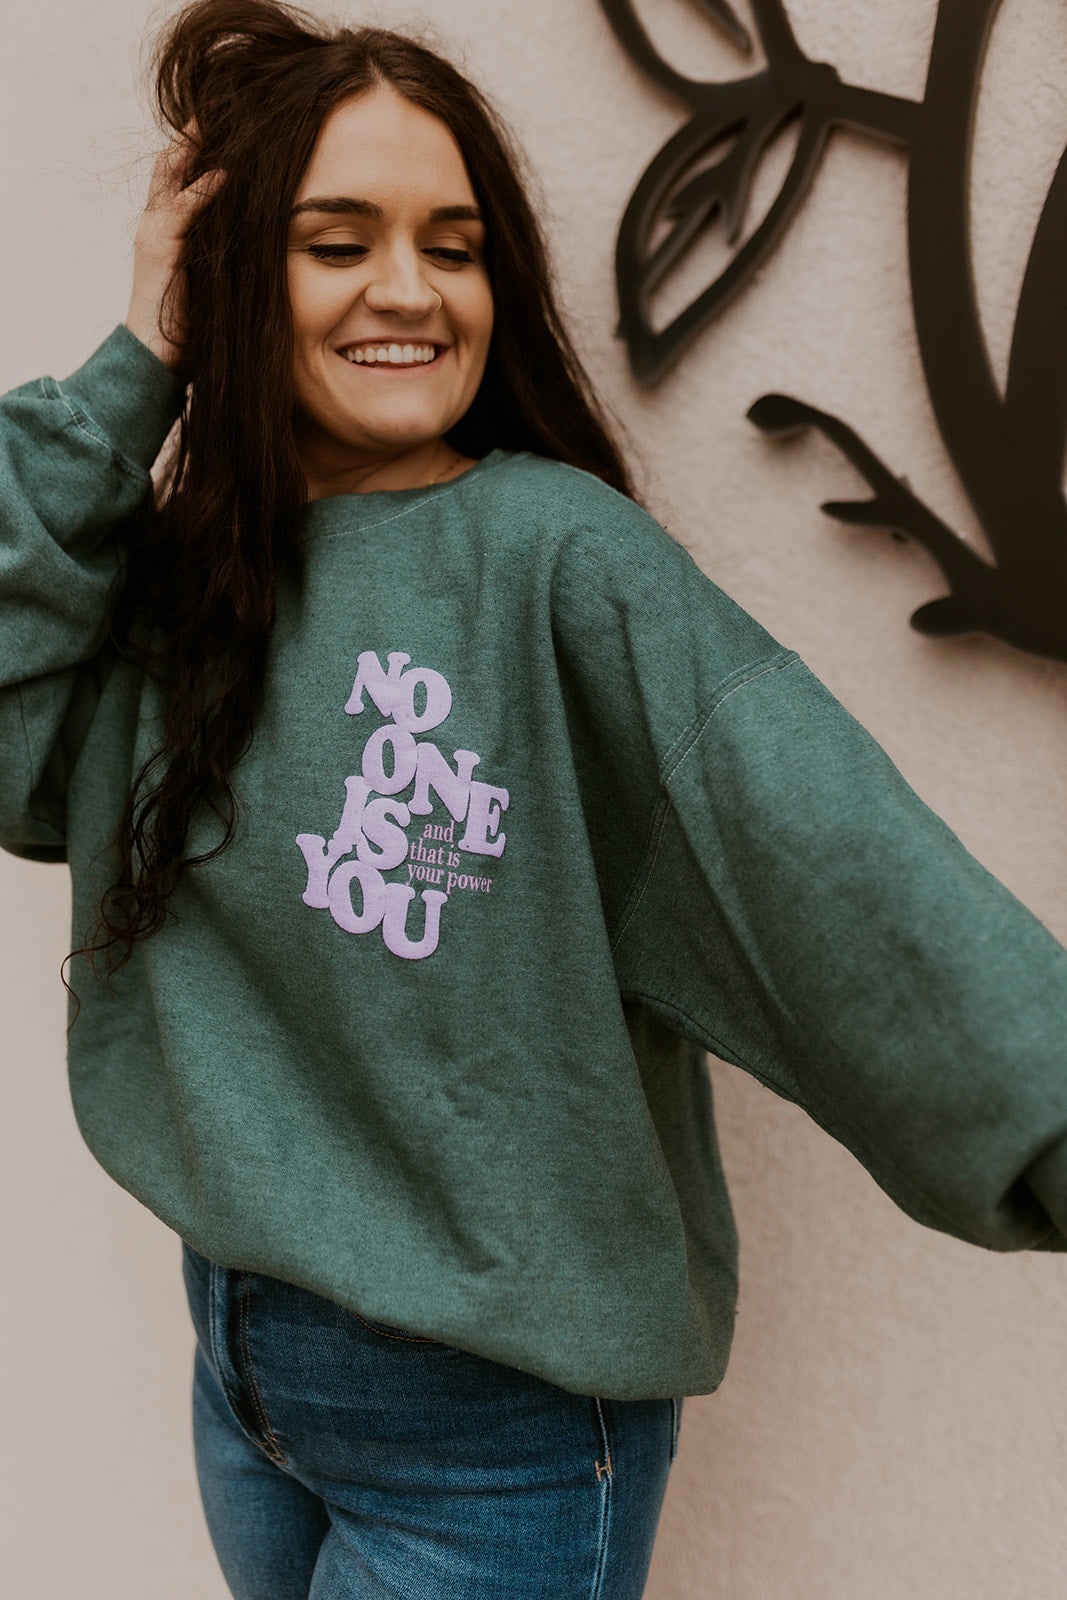 Green Sweatshirt that says No One is You in Purple